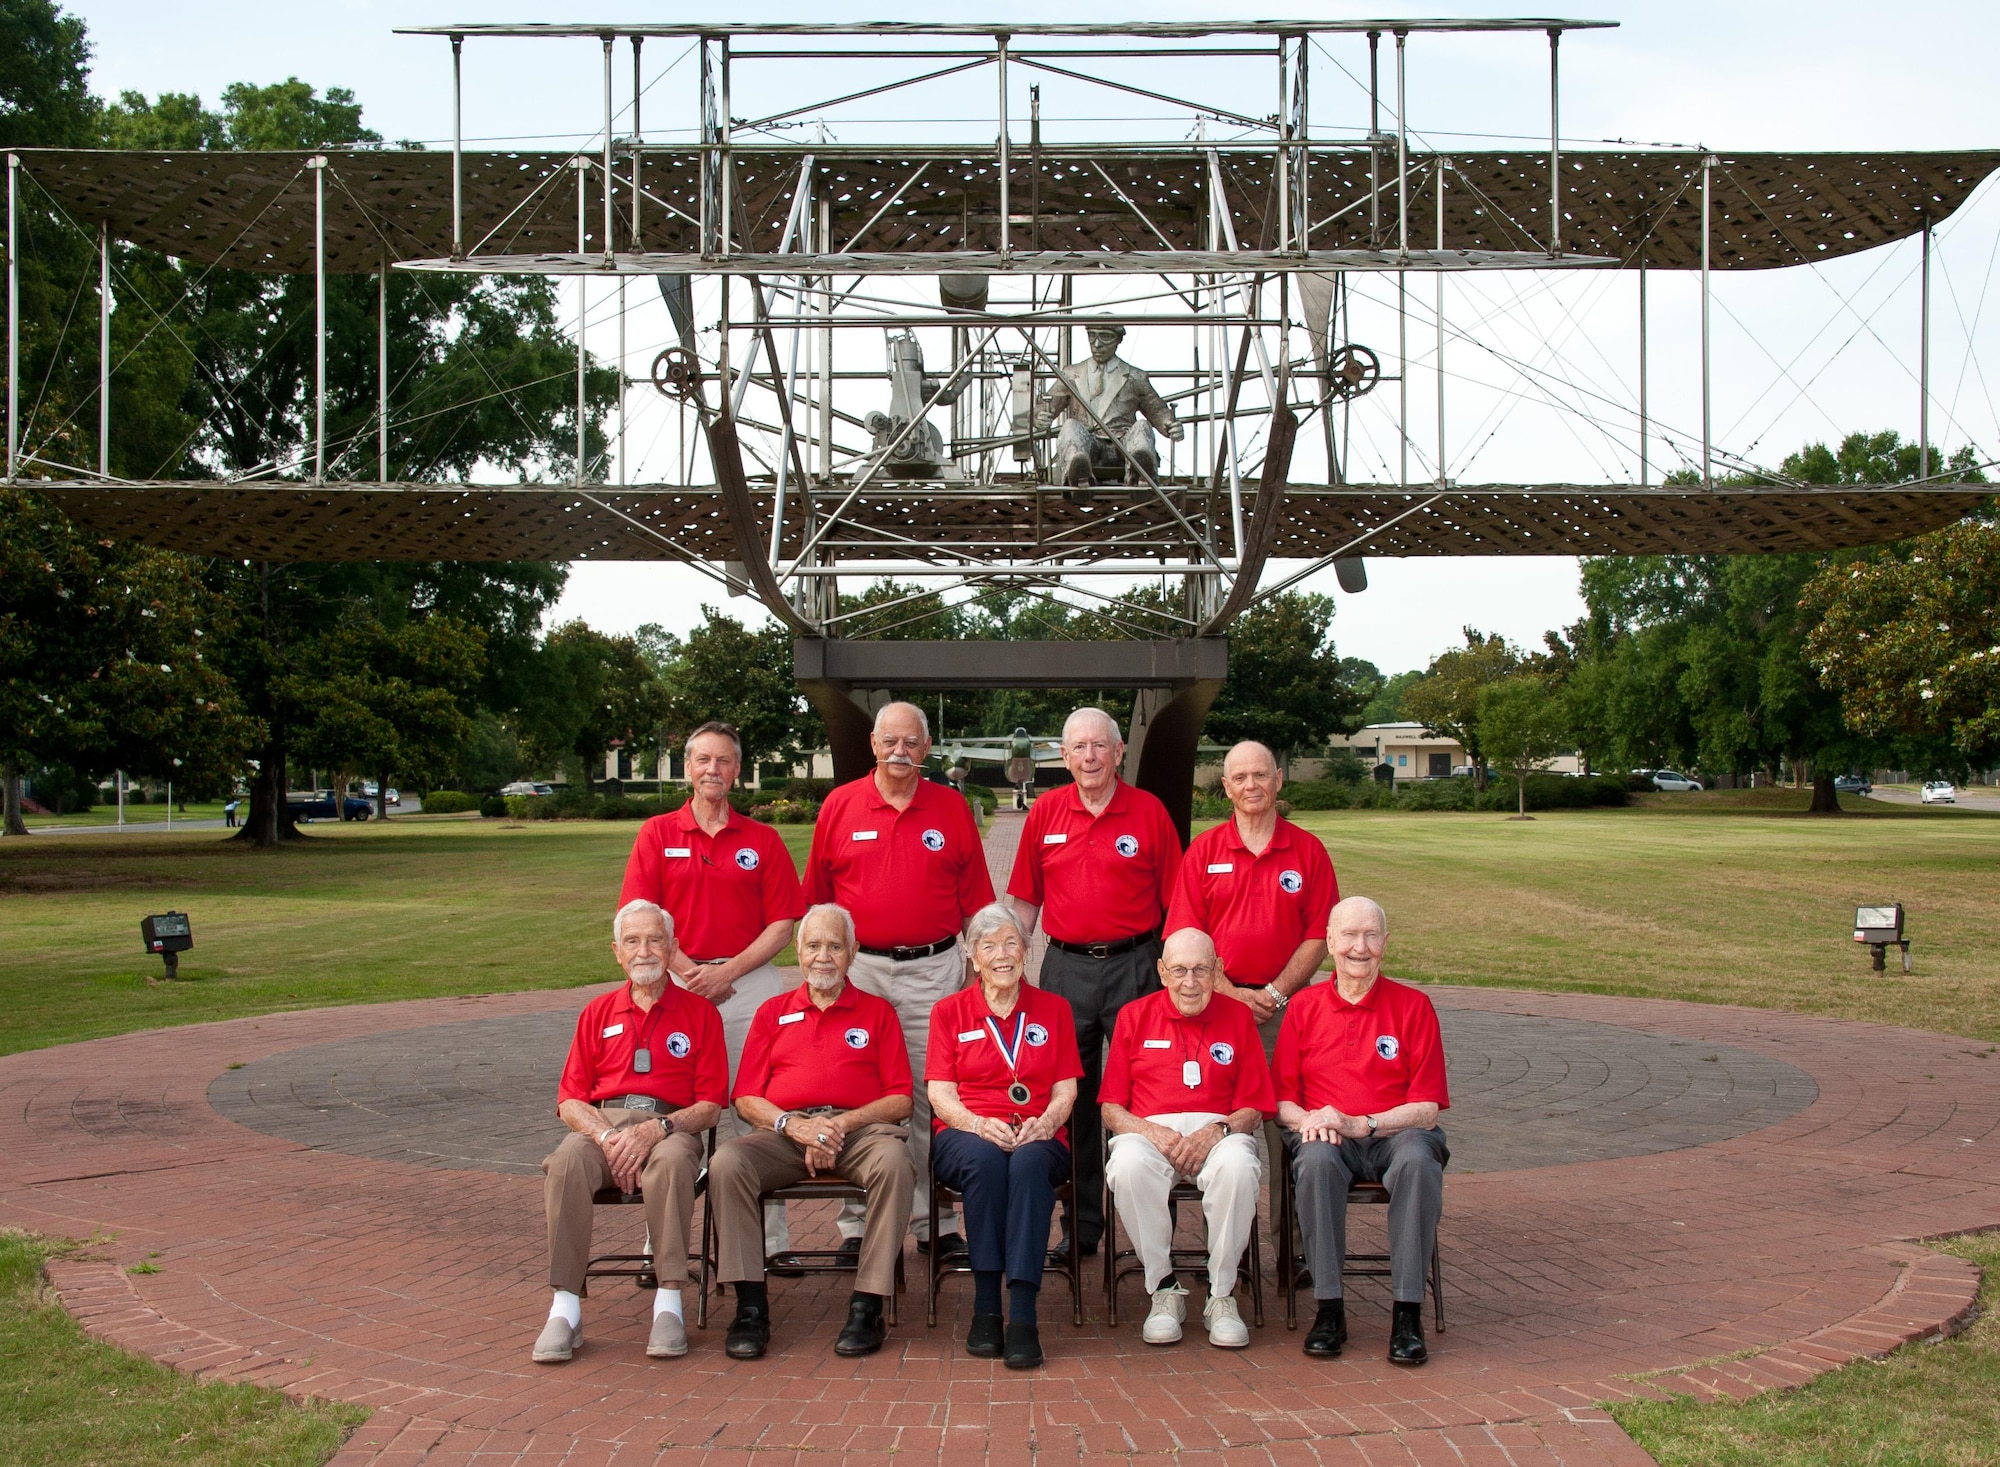 Aviation legends participating in Air Command and Staff College's 35th annual 2016 Gathering of Eagles event pose for a group photo in front of the Wright Flyer in Air Park, June 2, 2016. PIctured are (L-R) front row: Lieutenant General LeRoy J. Manor; Lieutenant Colonel Leo R. Gray; Dawn R.B. Seymour; Lieutenant Colonel Richard E. "Dick" Cole; Colonel Gail S. Halvorsen. Second Row: Master Sergeant Timothy A. Wilkinson; Colonel Gaillard "Evil" Peck, Jr.; General Charles G. "Chuck" Boyd; Brigadier General Amir Nachumi. GOE is a program that encourages the study of aviation history and emphasizes contributions of air and space pioneers.  (US Air Force photo by Melanie Rodgers Cox/Released)


